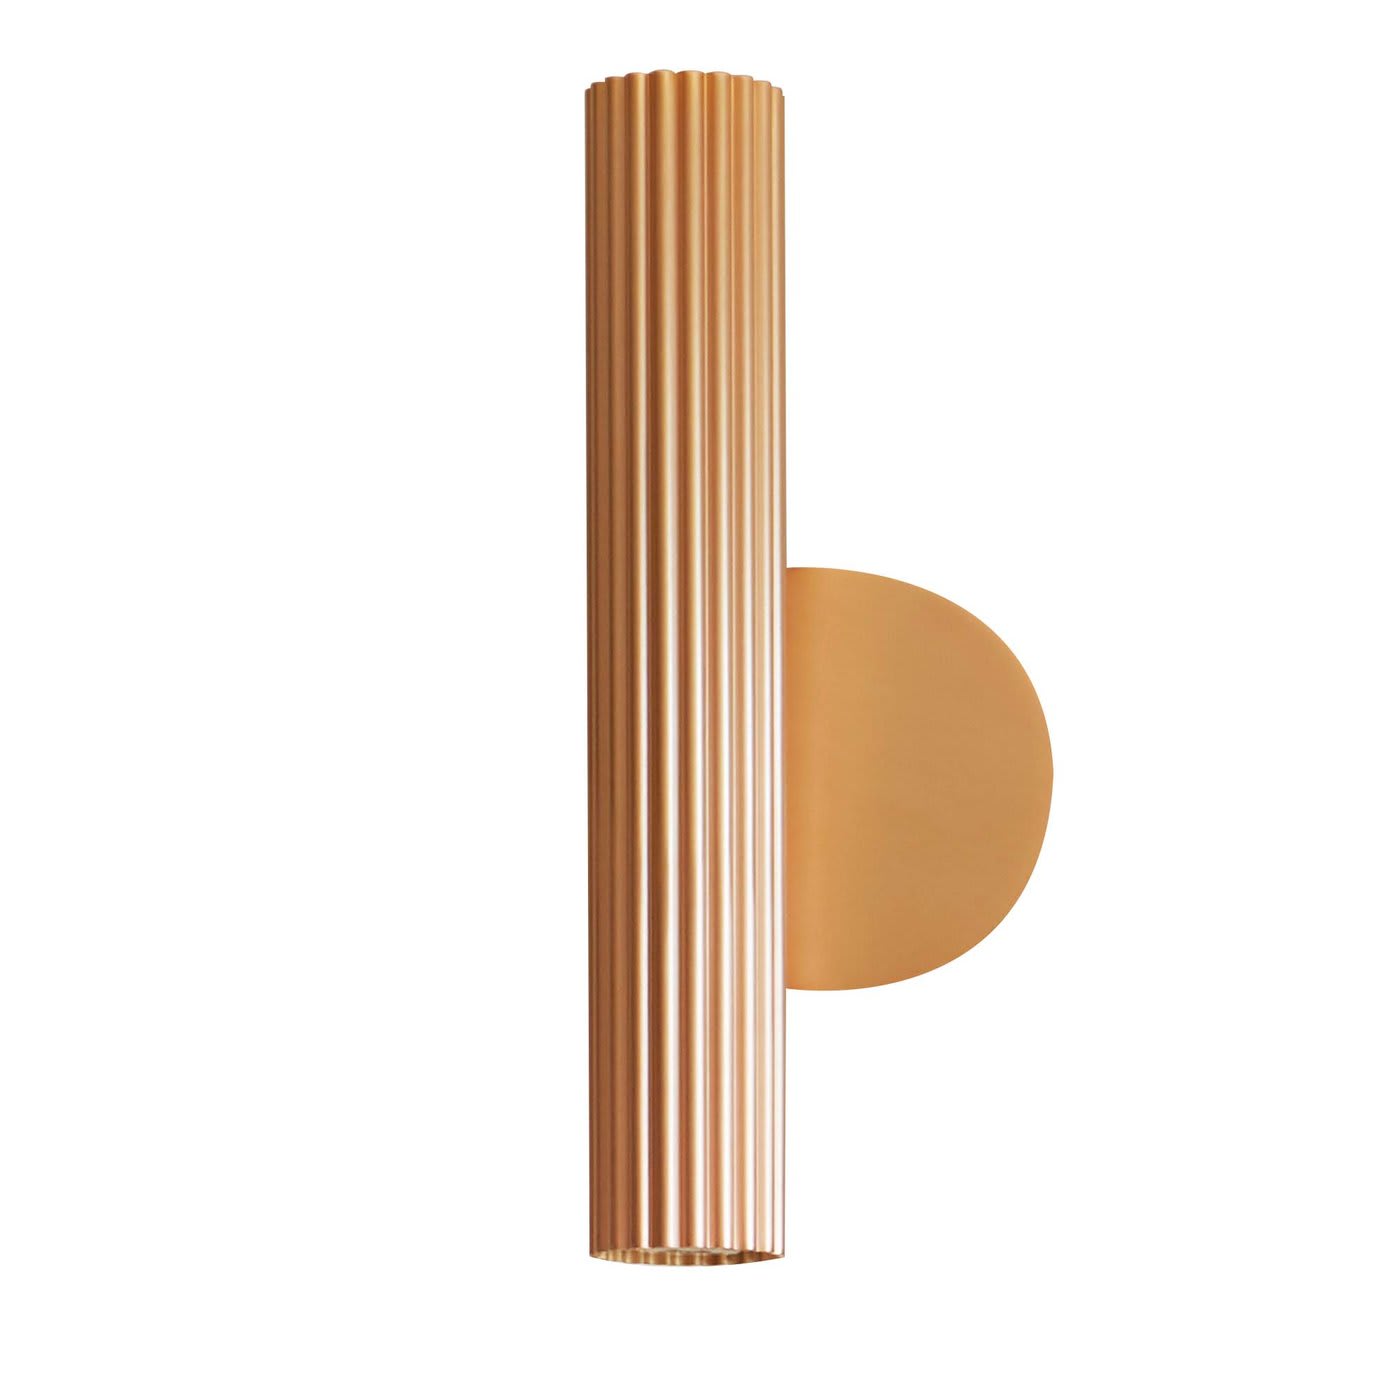 Lustrin Pink Champagne Sconce by Isacco Brioschi - Luce Tu Lighting